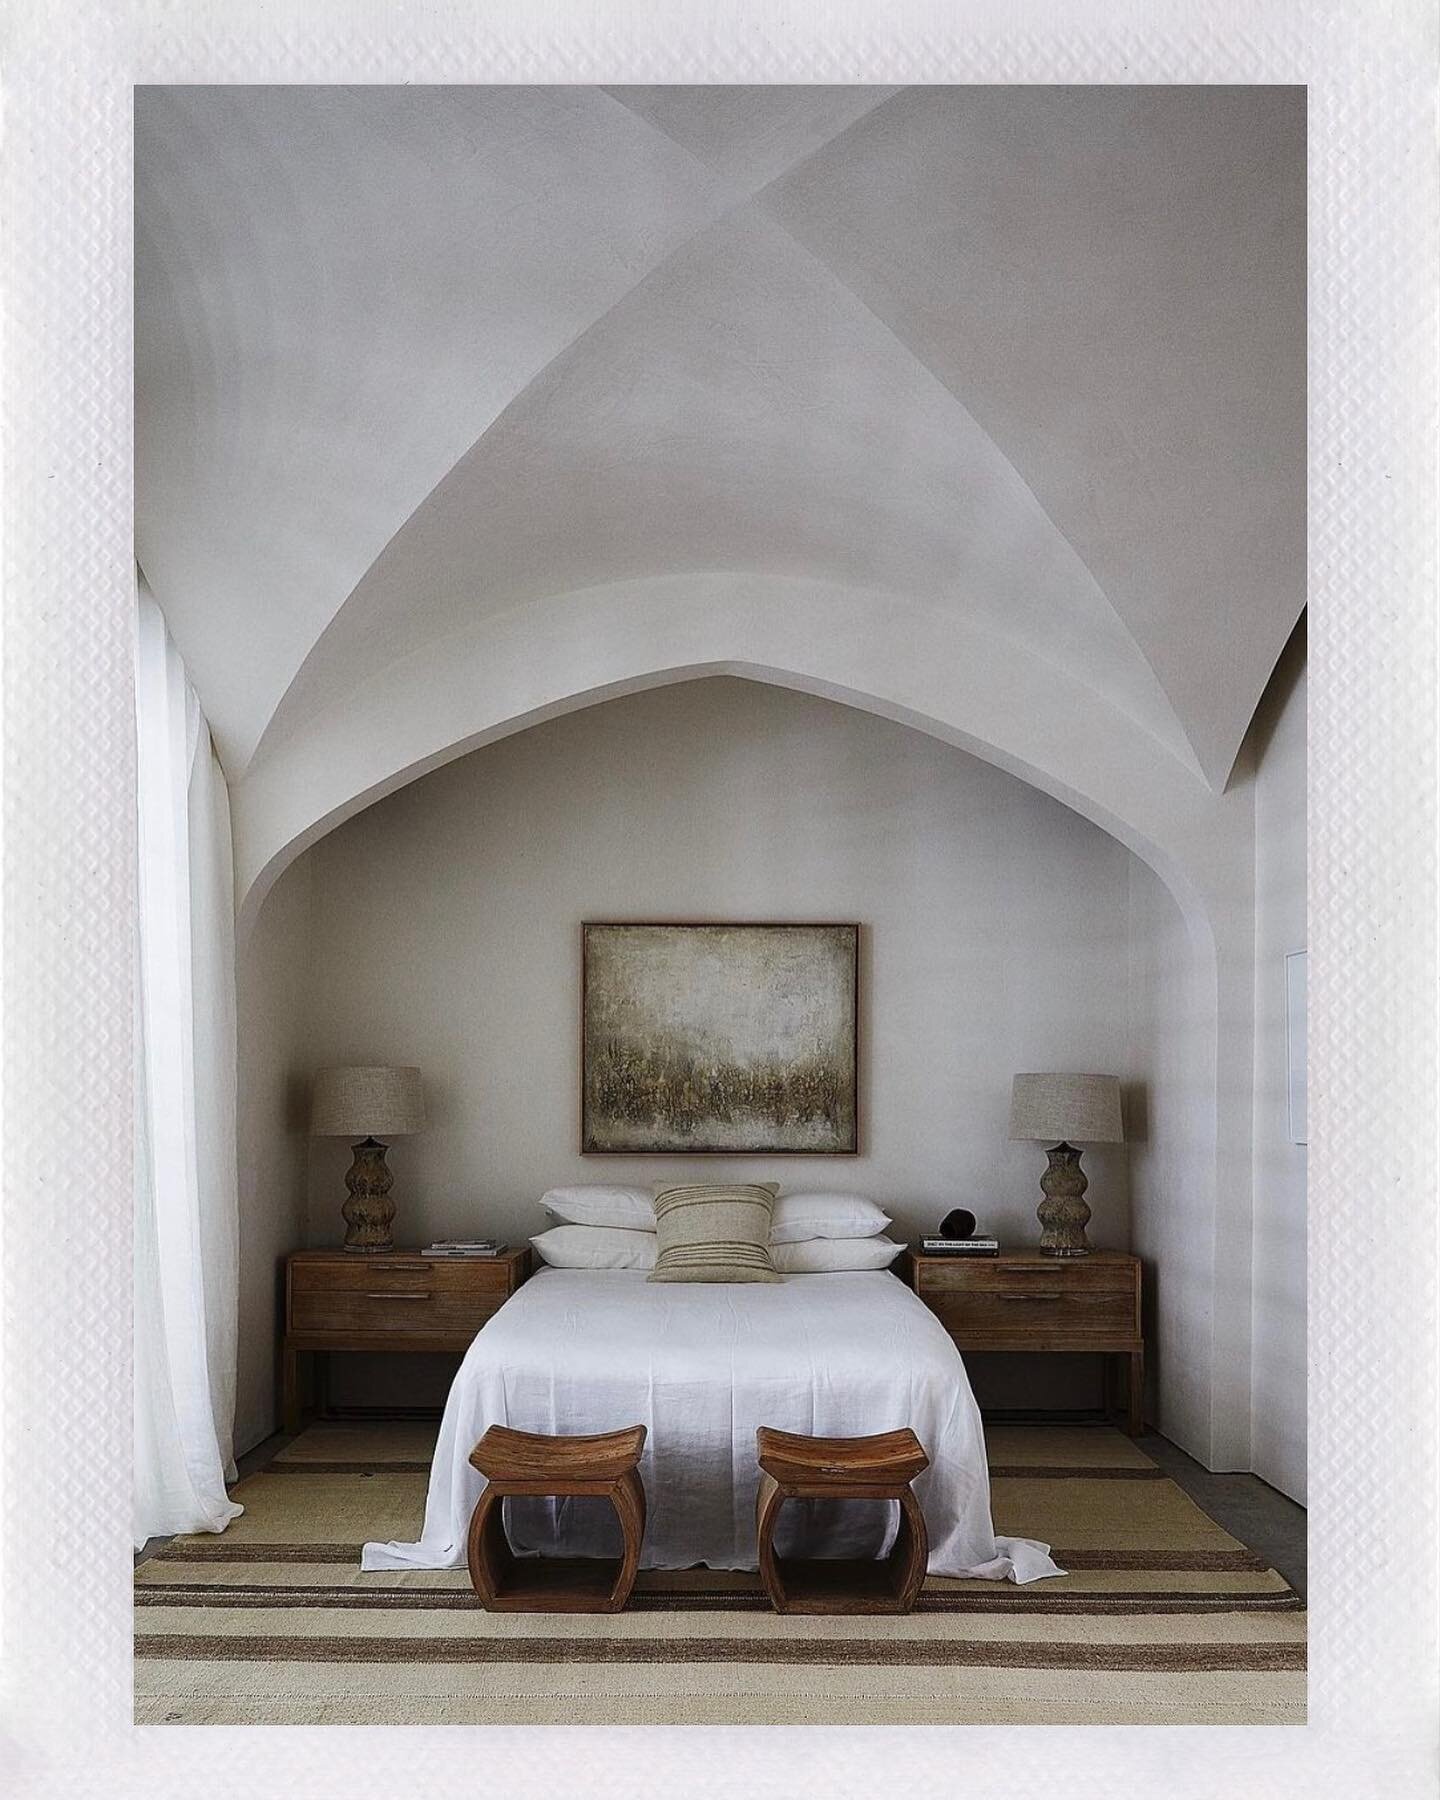 the weekend closes, the plaster curved ceiling would ensure only the sweetest of dreams are to be had #interirorinspiration #interiordesign #interiorstyling #jeffreydunganarchitects